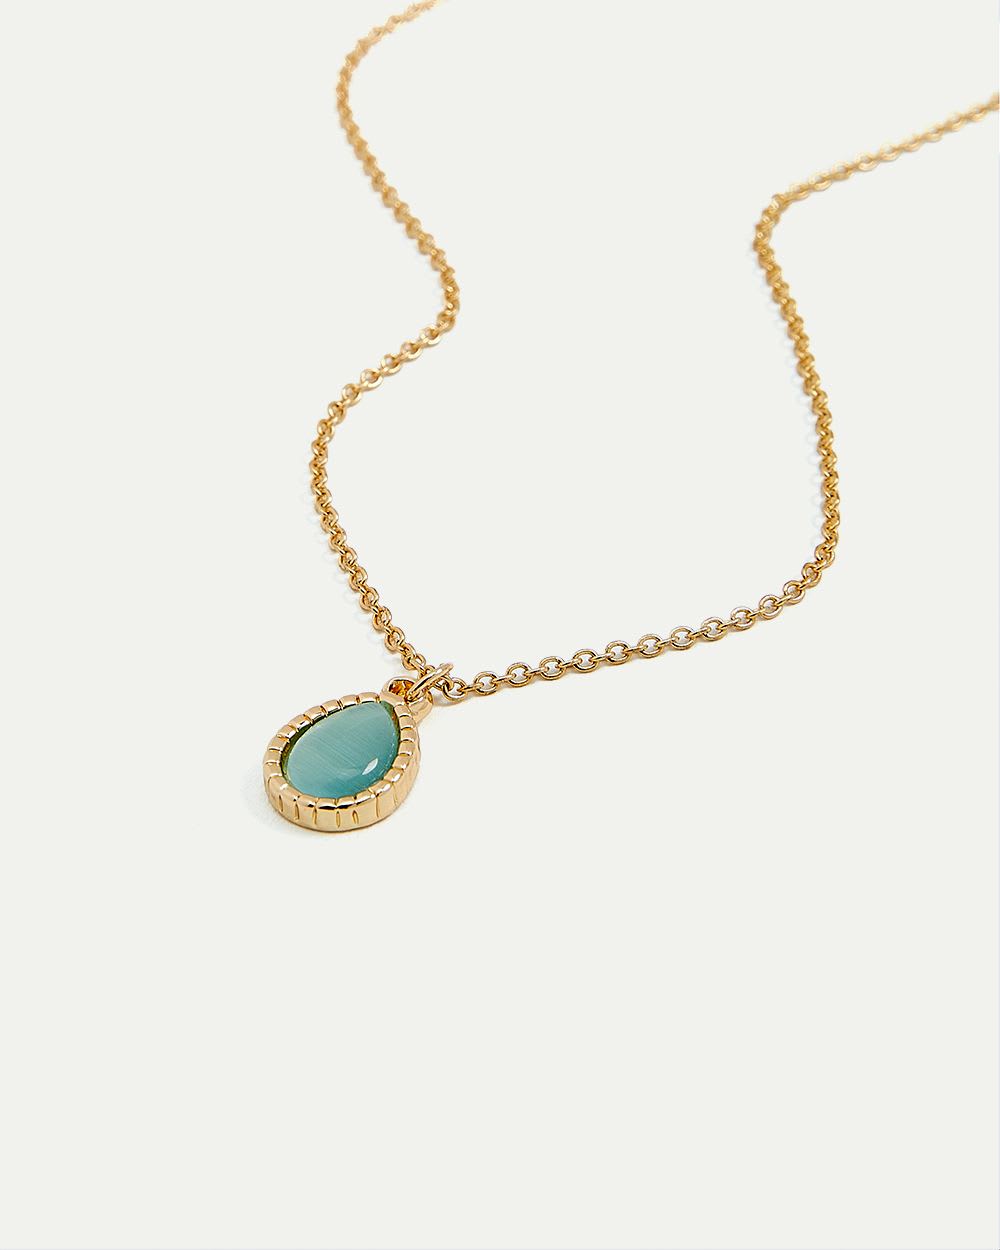 Short Necklace with Teal Teardrop Pendant